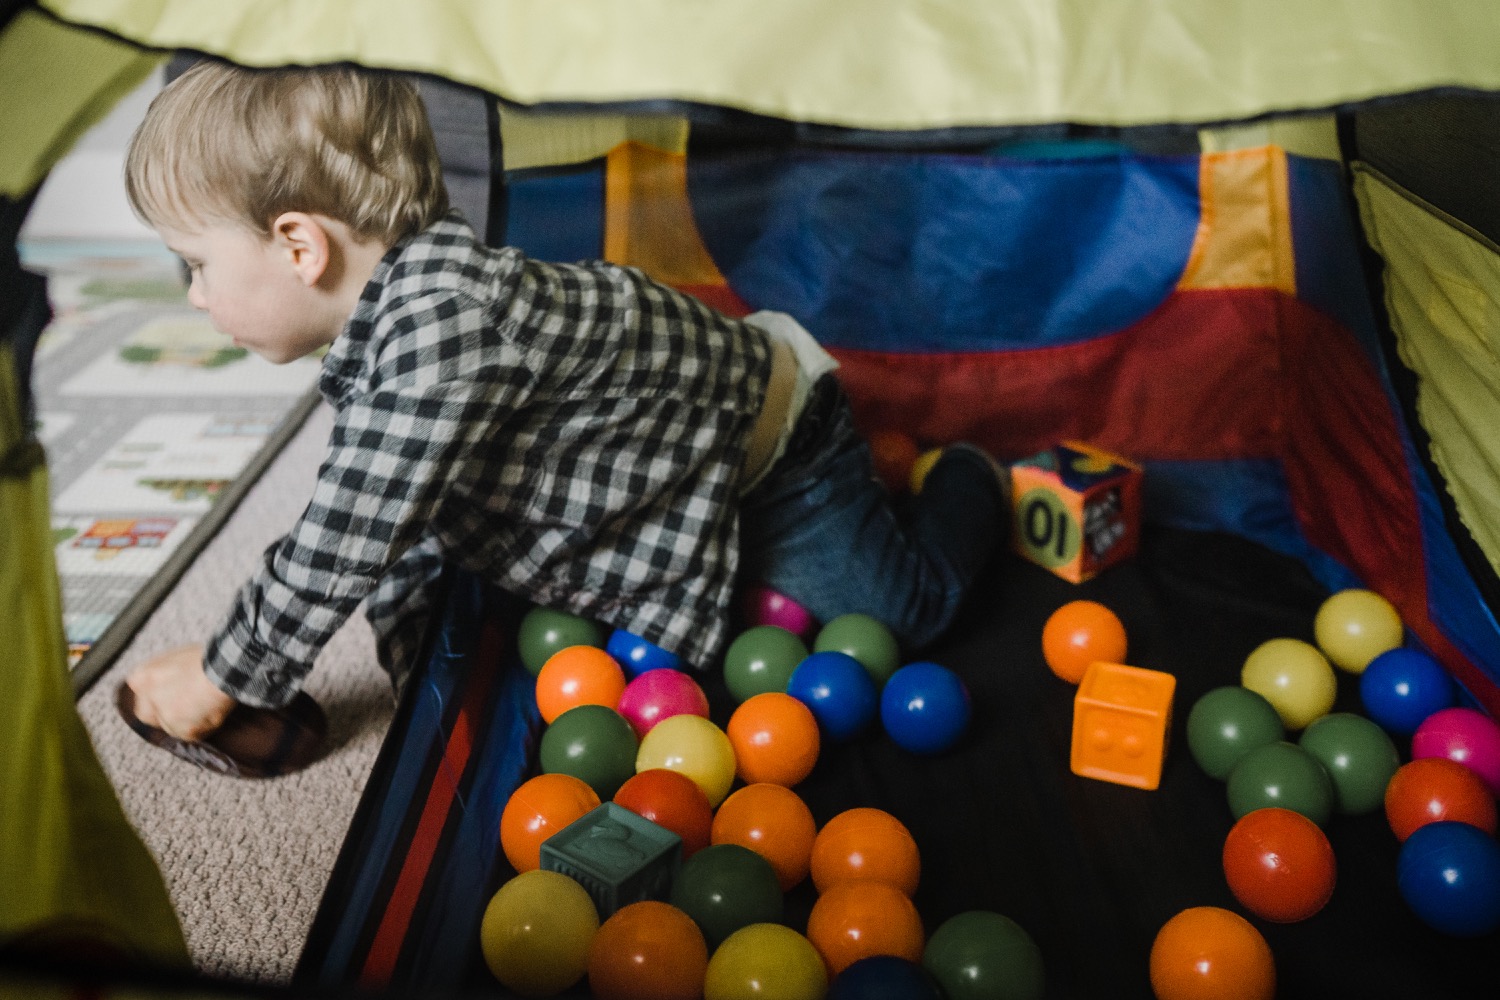 Little boy in plaid shirt crawling out of ball pit